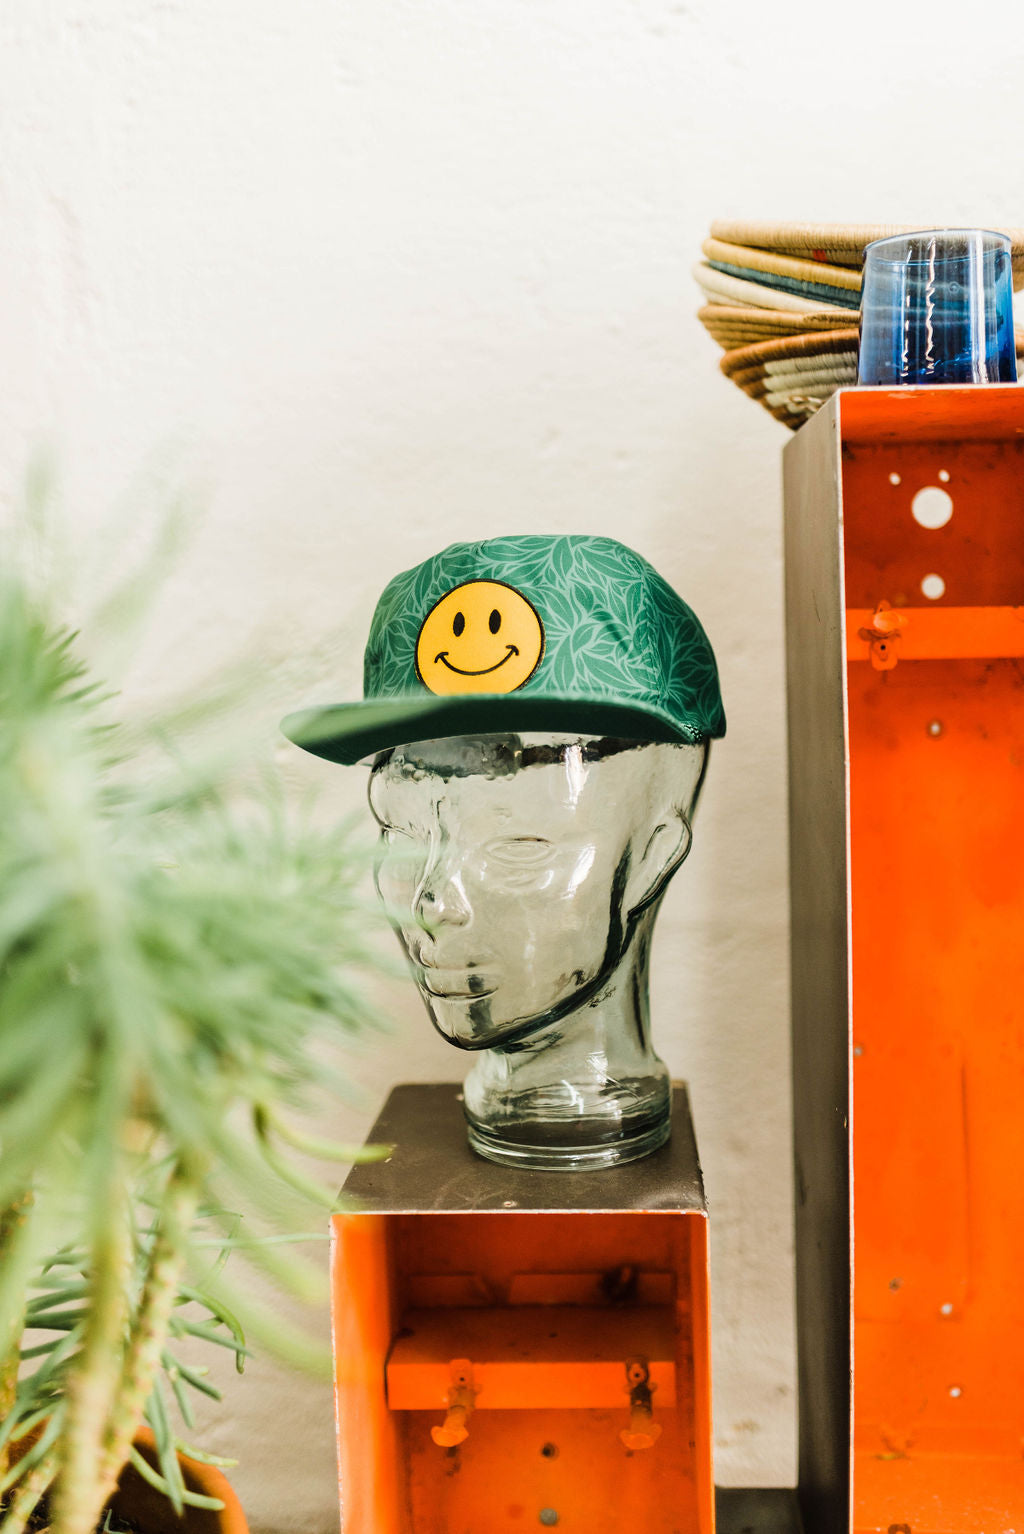 smiley green floral | hat